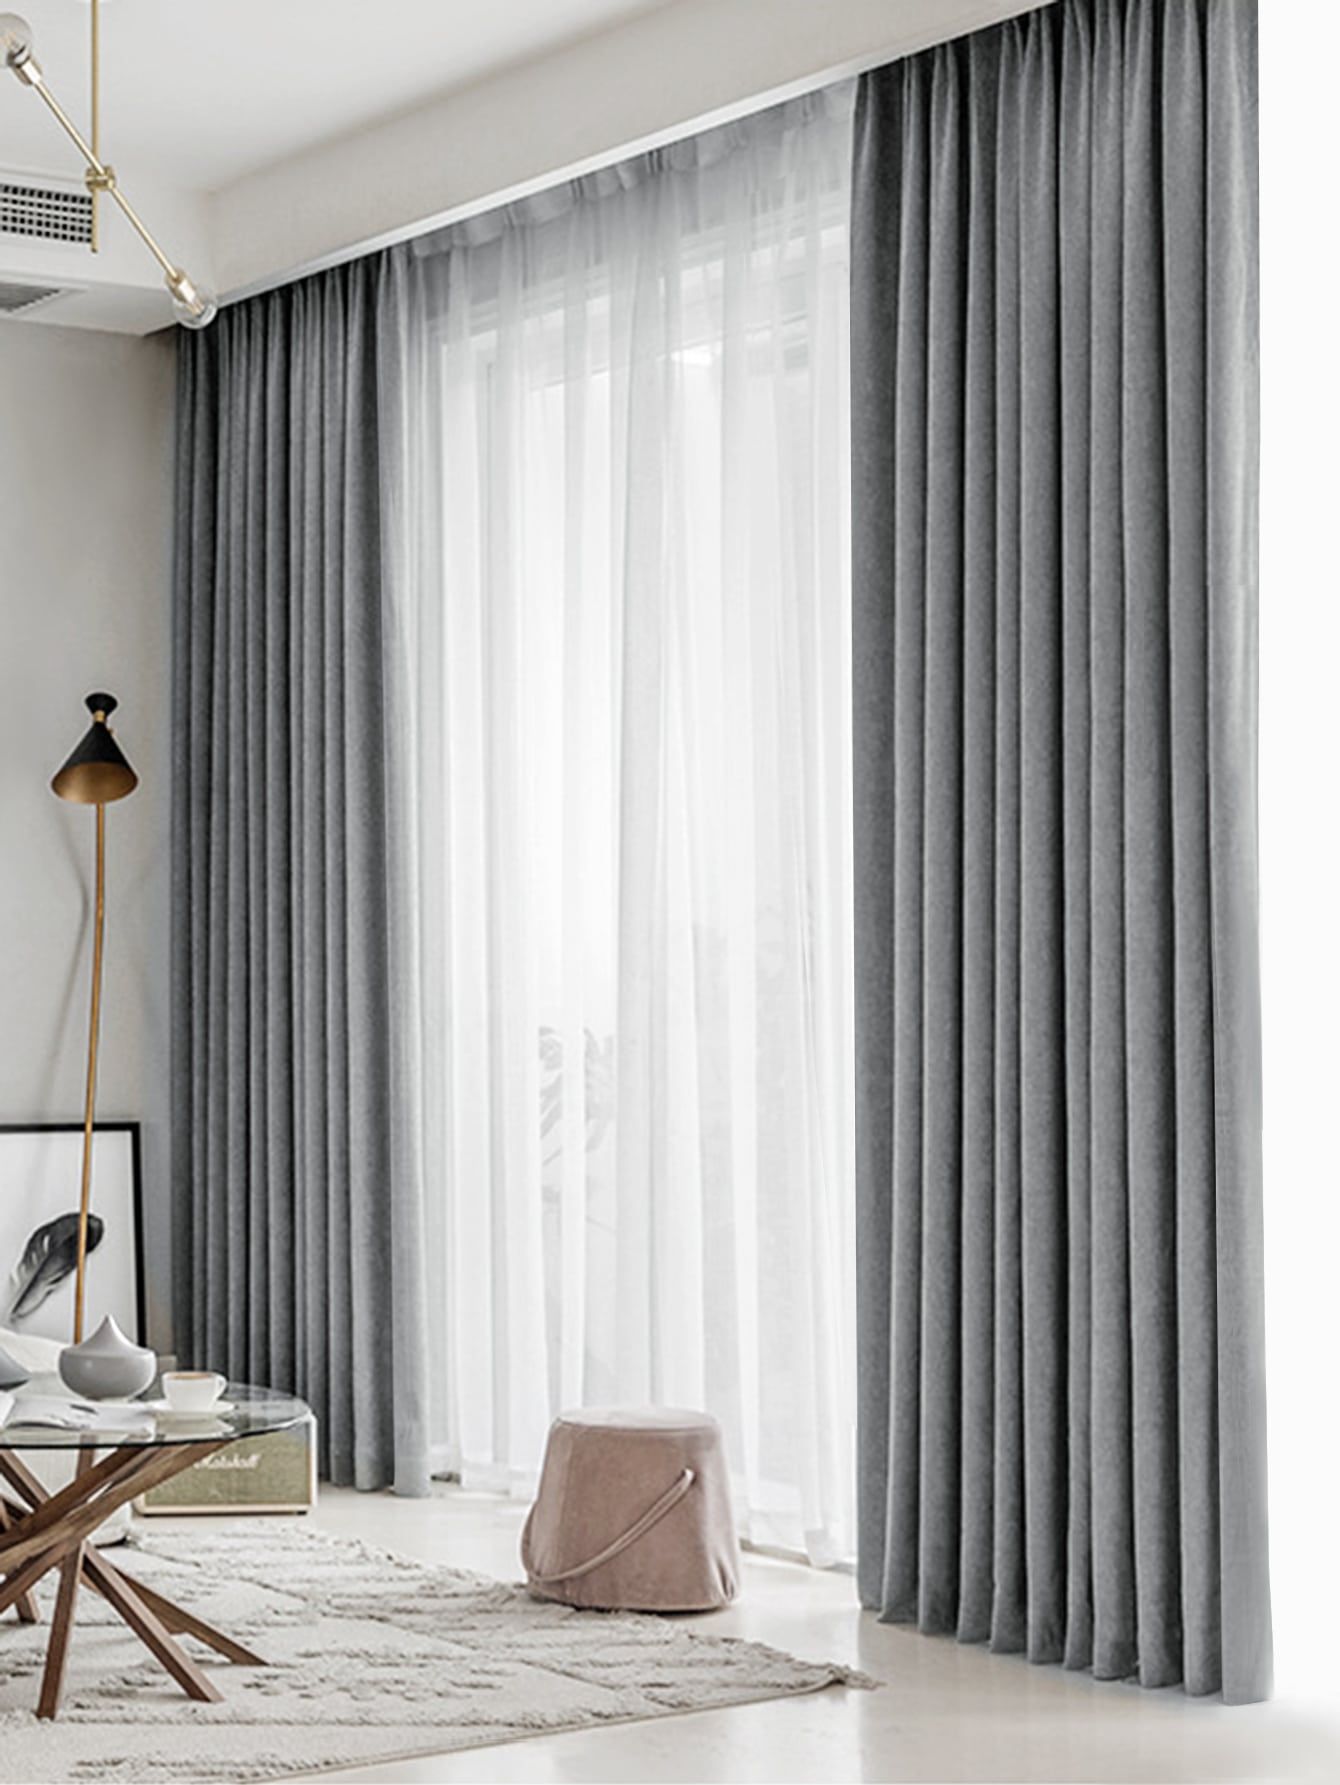 Blackout Curtains: Enhancing Privacy and Comfort in Any Room